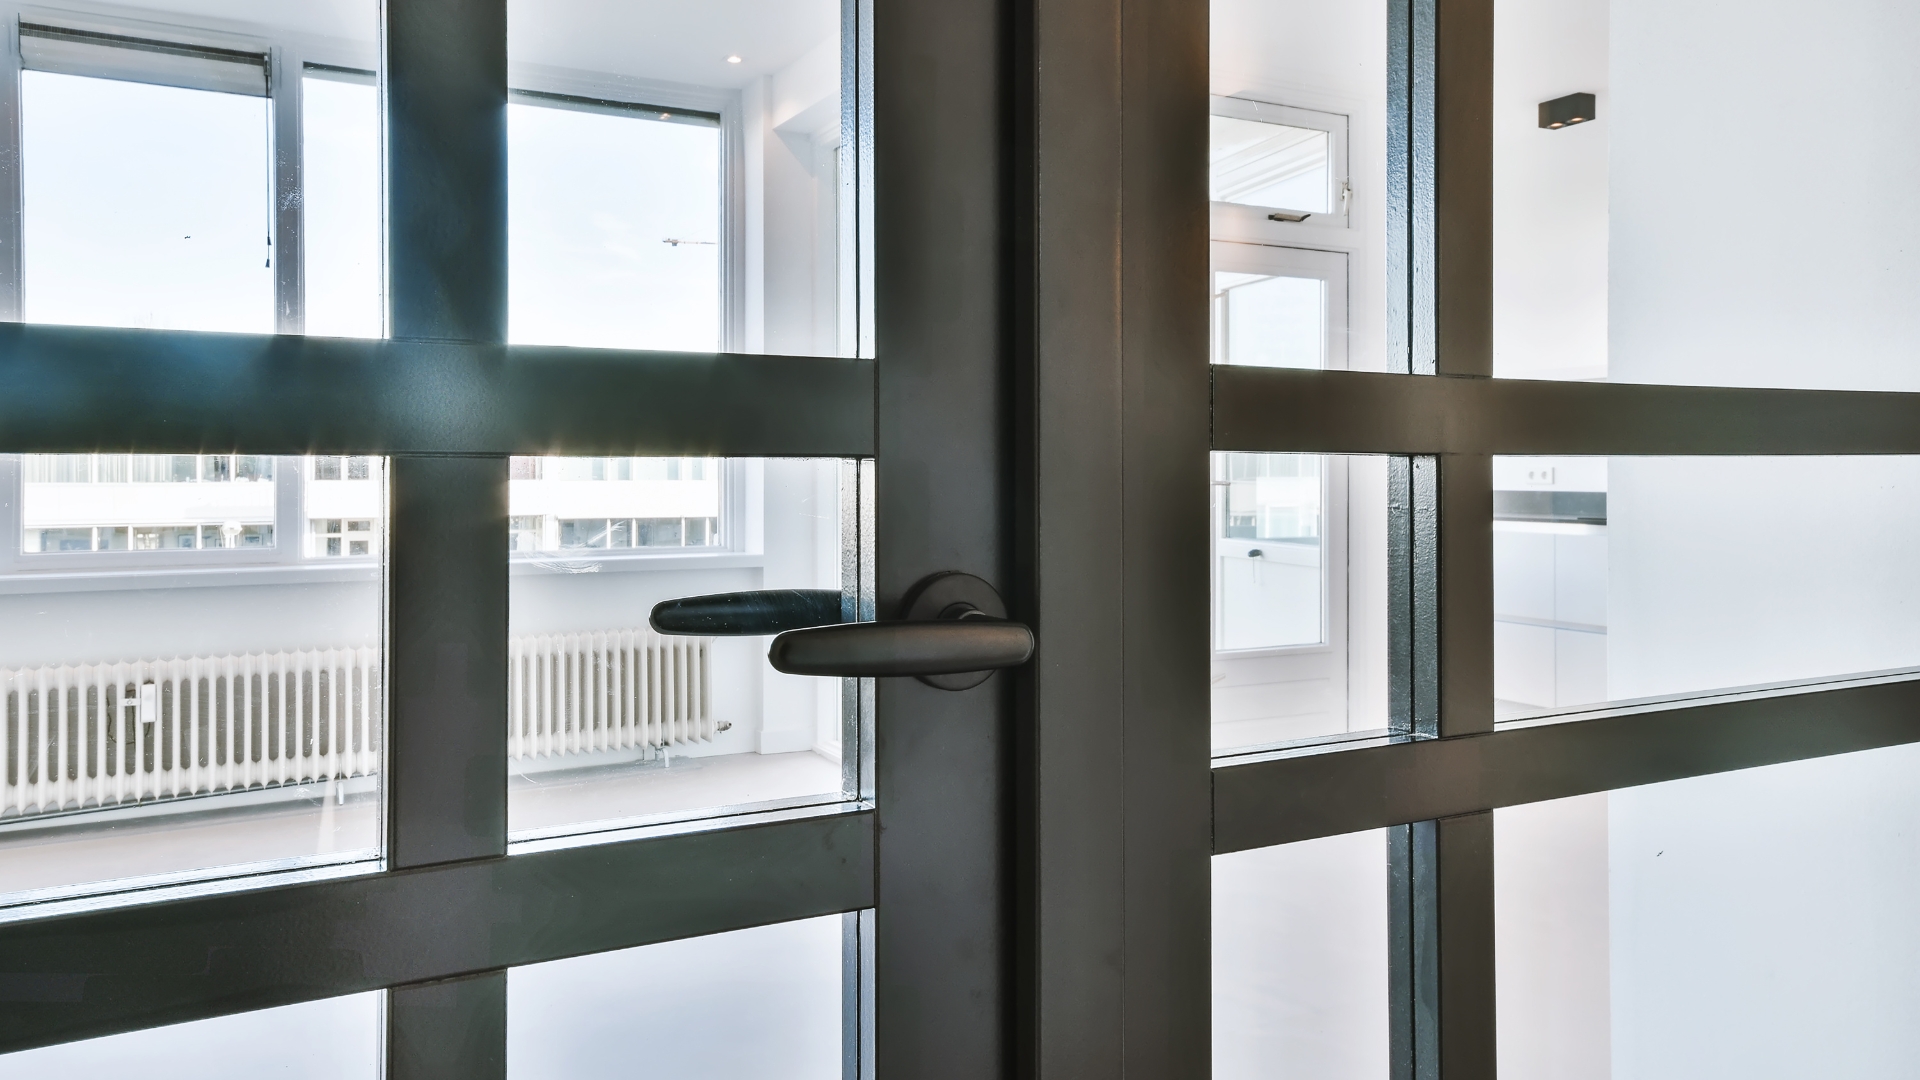 An interior aluminum and glass door in a building